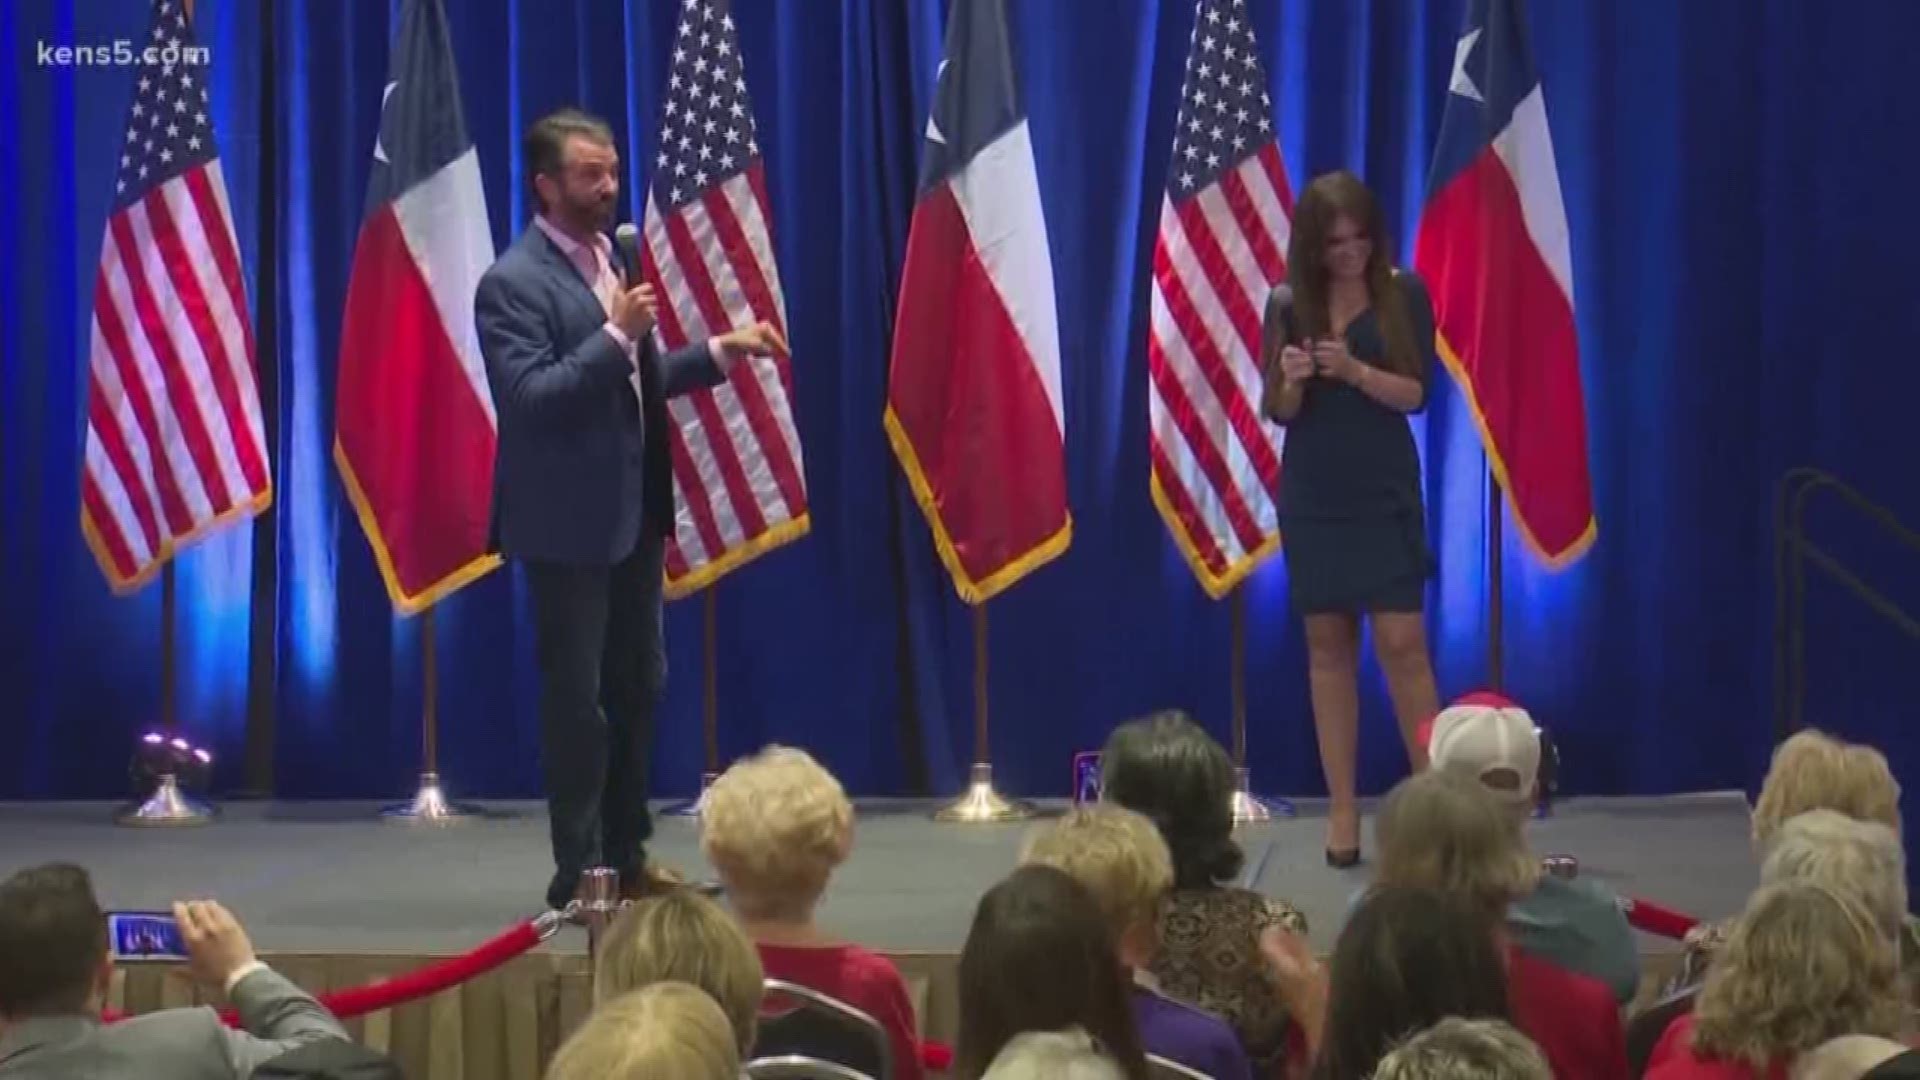 With fewer than 13 months to go until Electin Day, Donald Trump Jr. led a rally in downtown San Antonio hours ahead of the latest Democratic debate.